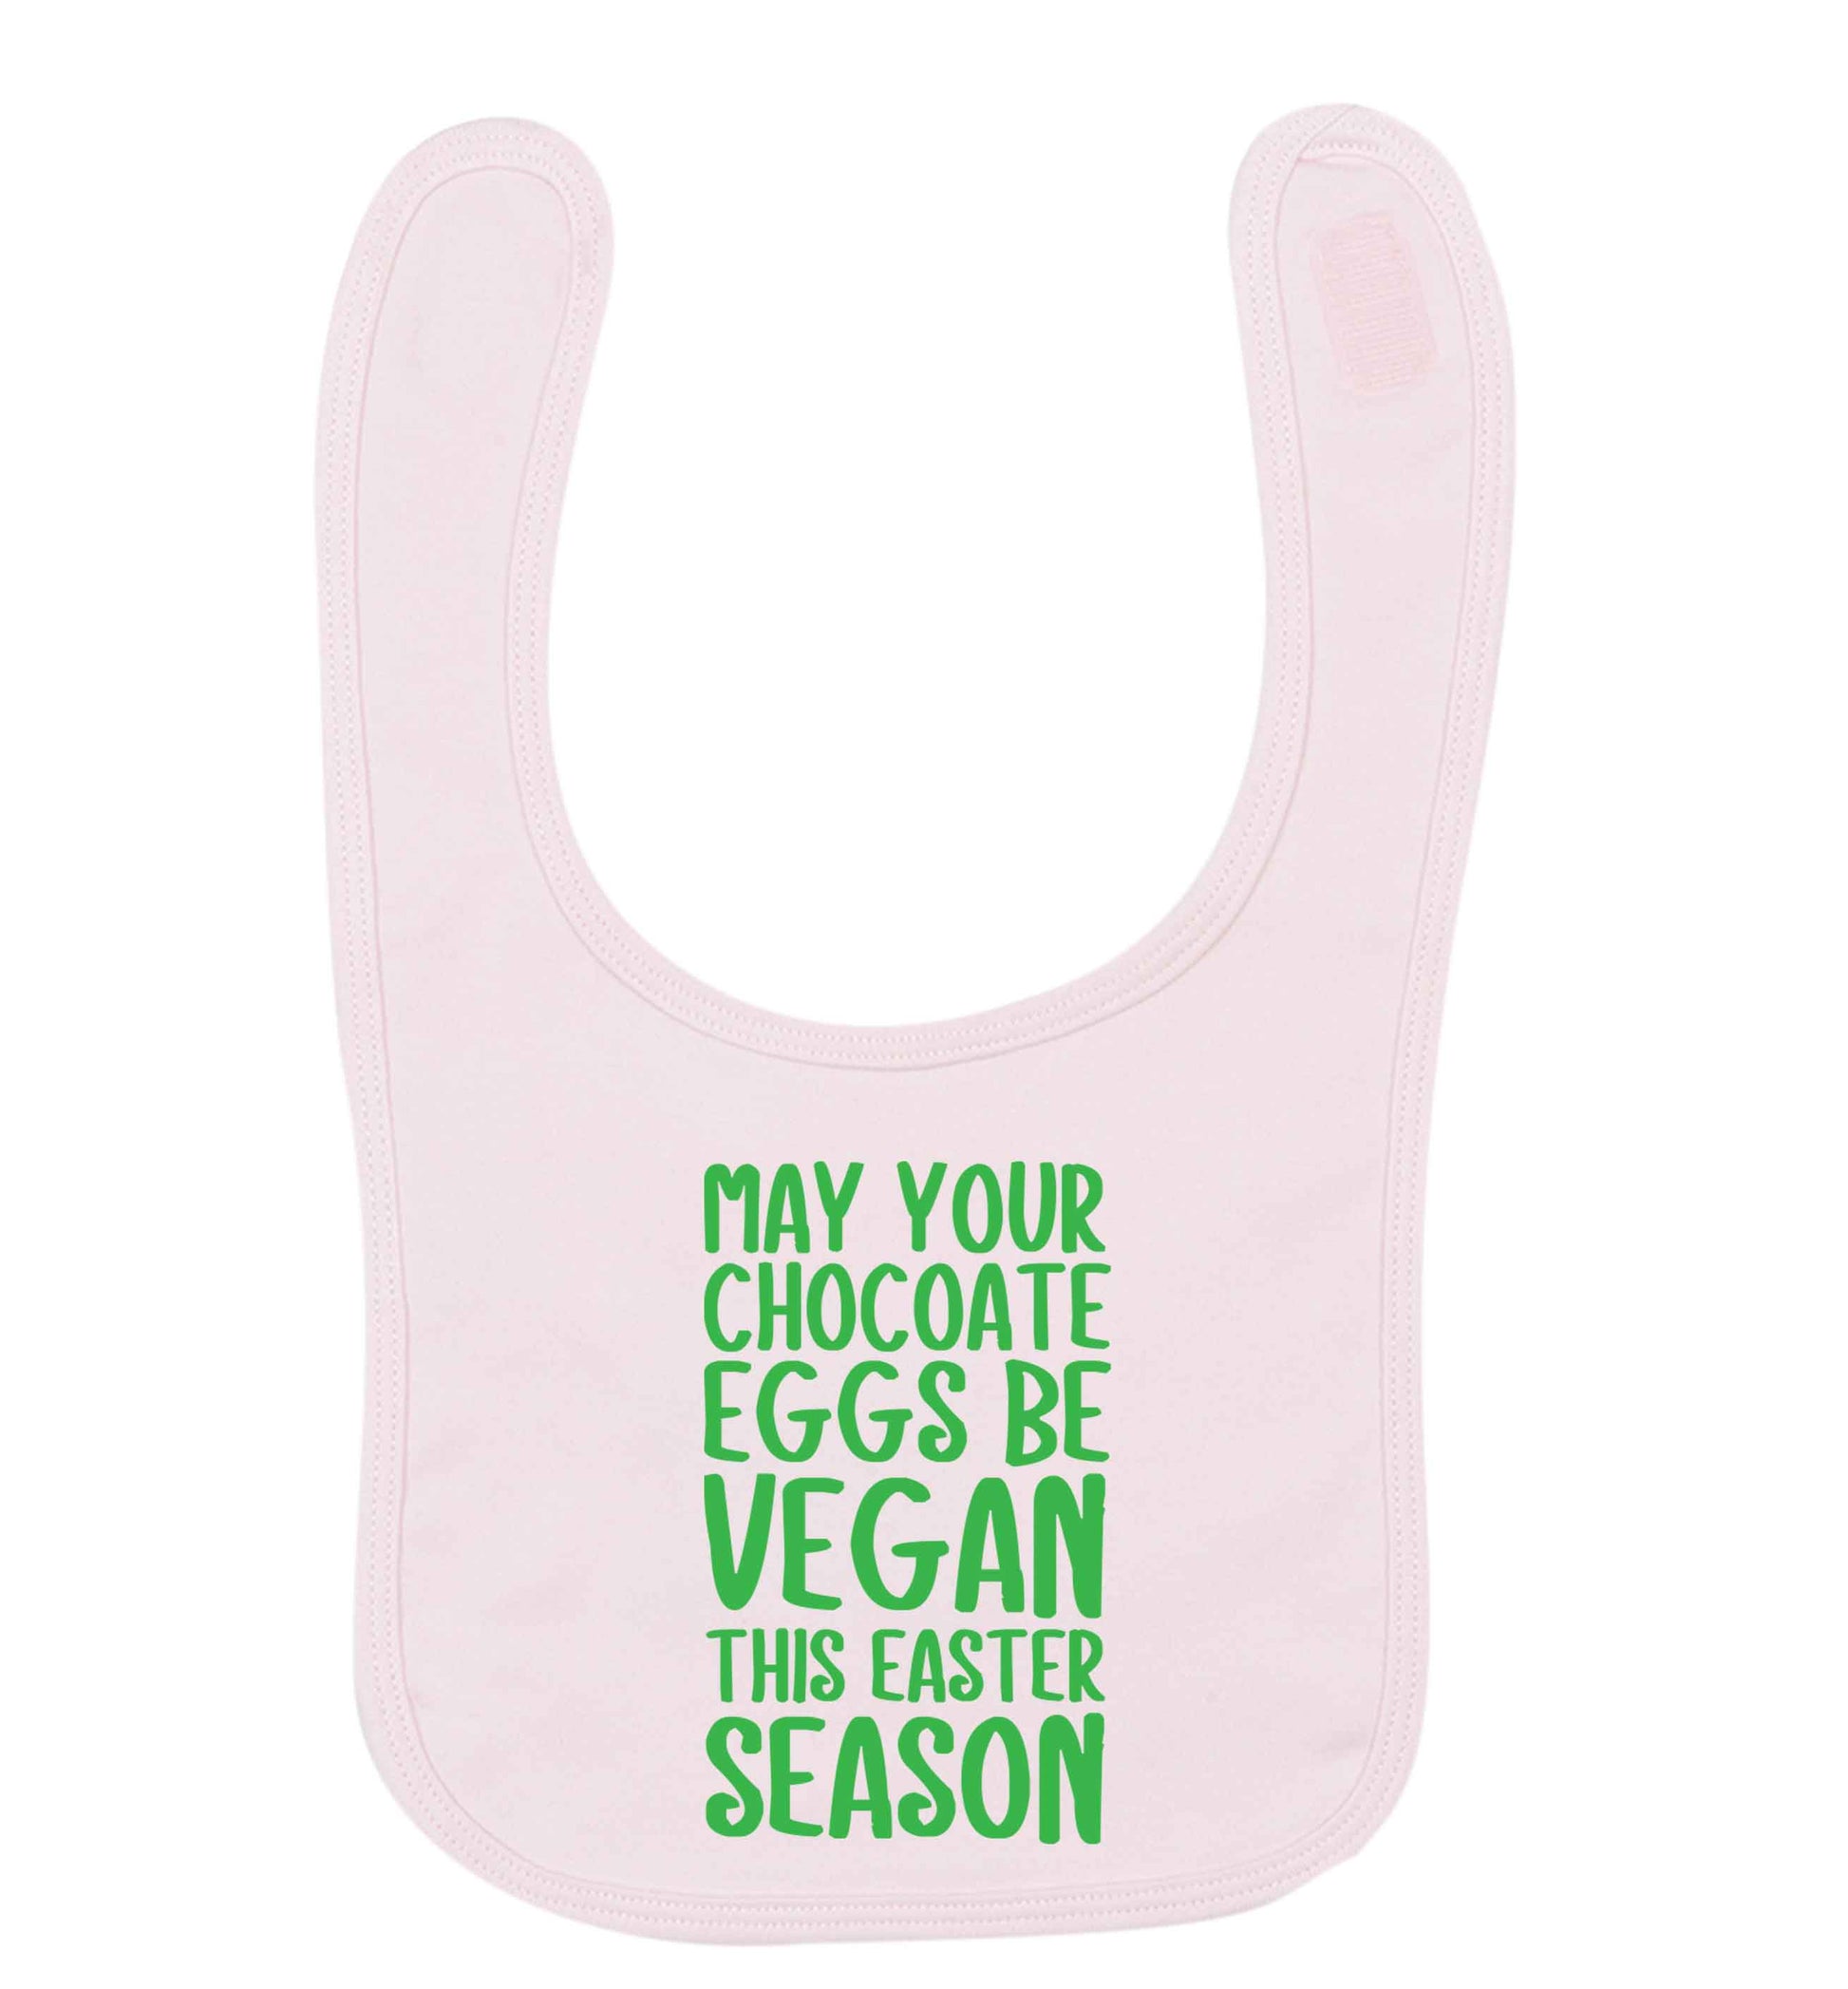 Easter bunny approved! Vegans will love this easter themed pale pink baby bib